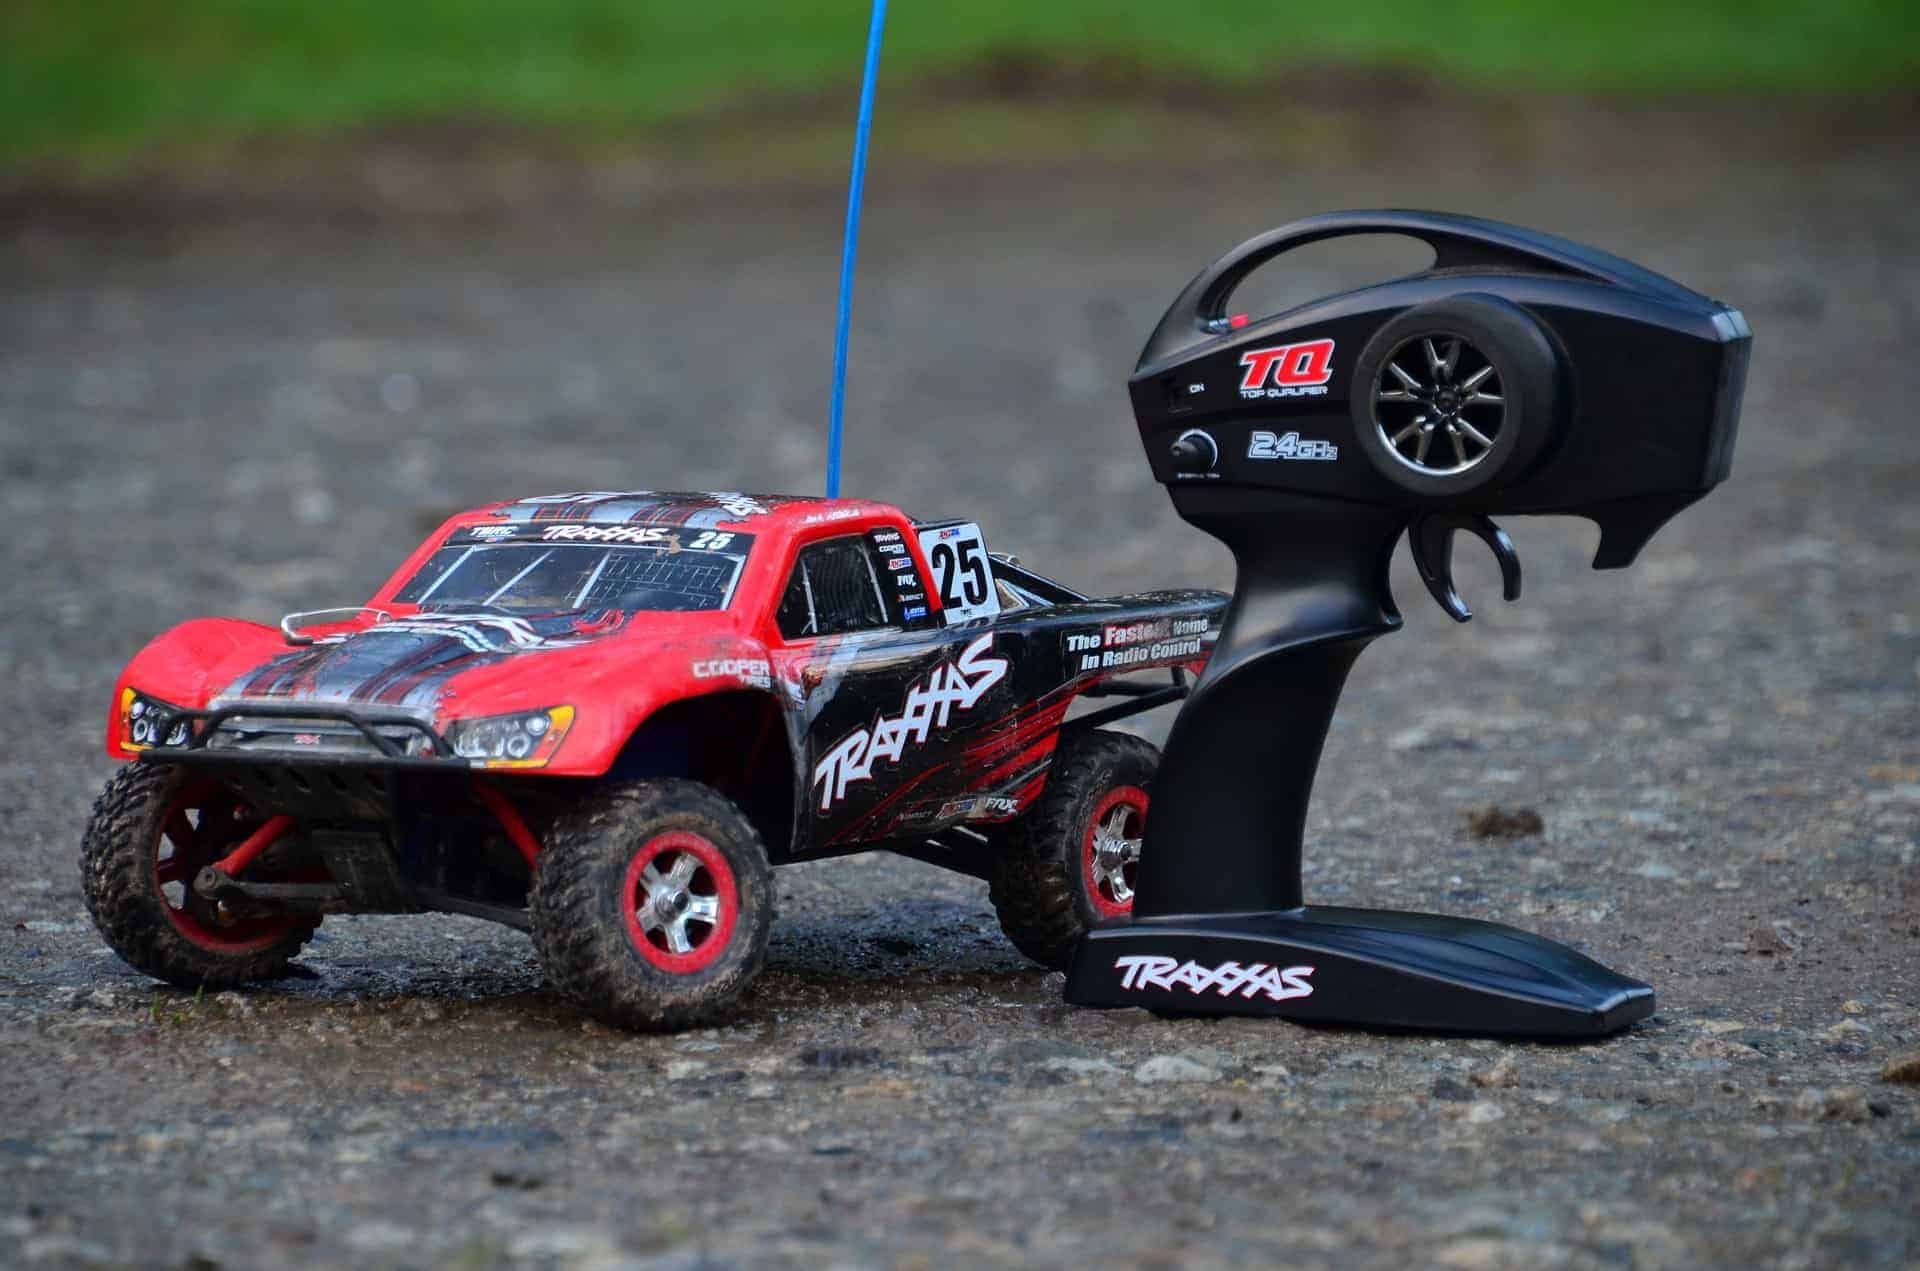 One of the best remote control car podels on the market today.